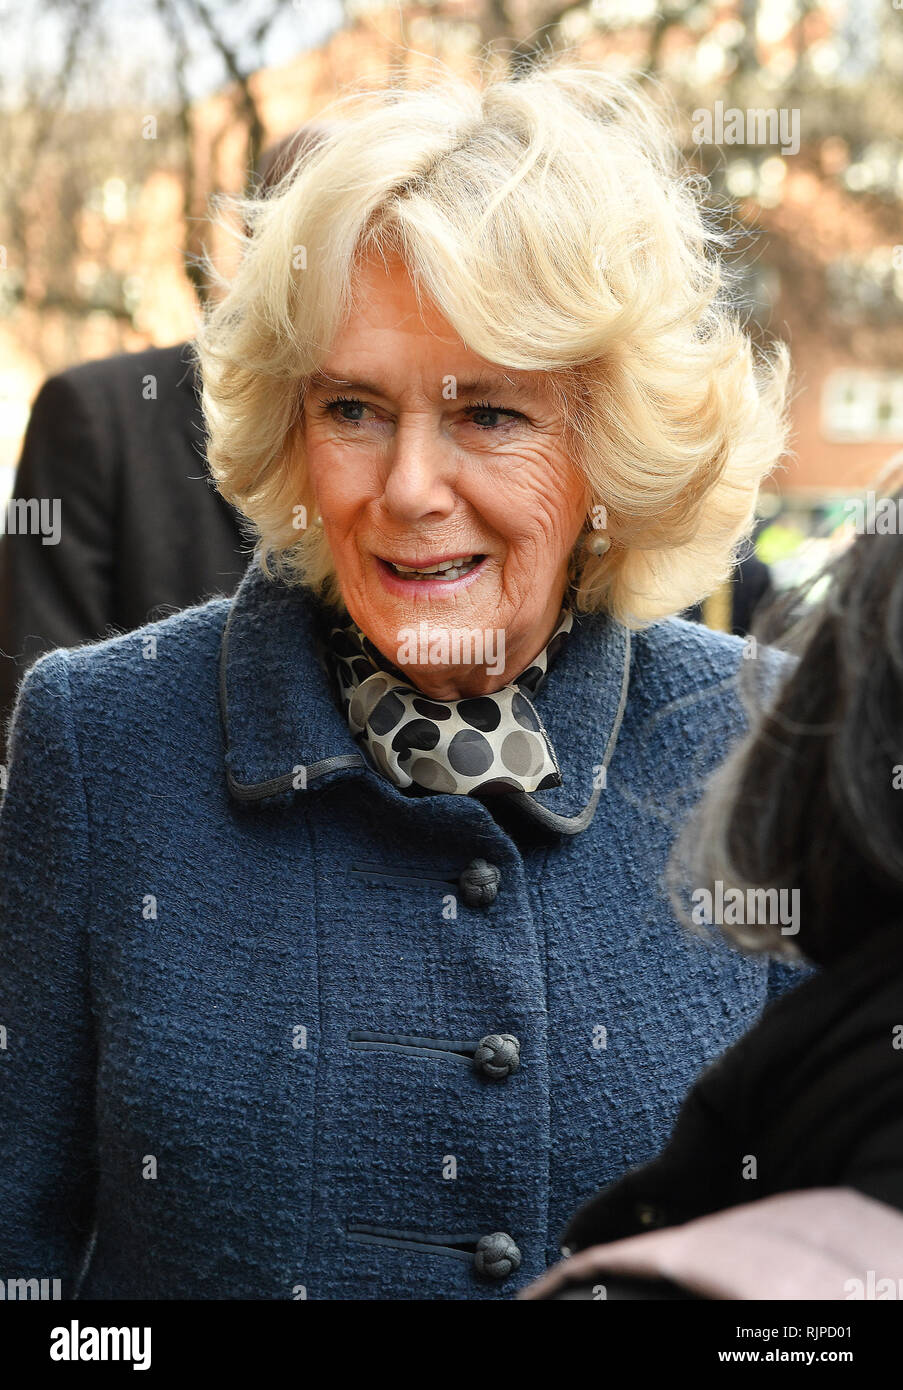 The Duchess of Cornwall meets the people who grow garden produce during a visit to the Lambeth GP Food Co-op Garden at Swann Mews, in Stockwell, London. Stock Photo